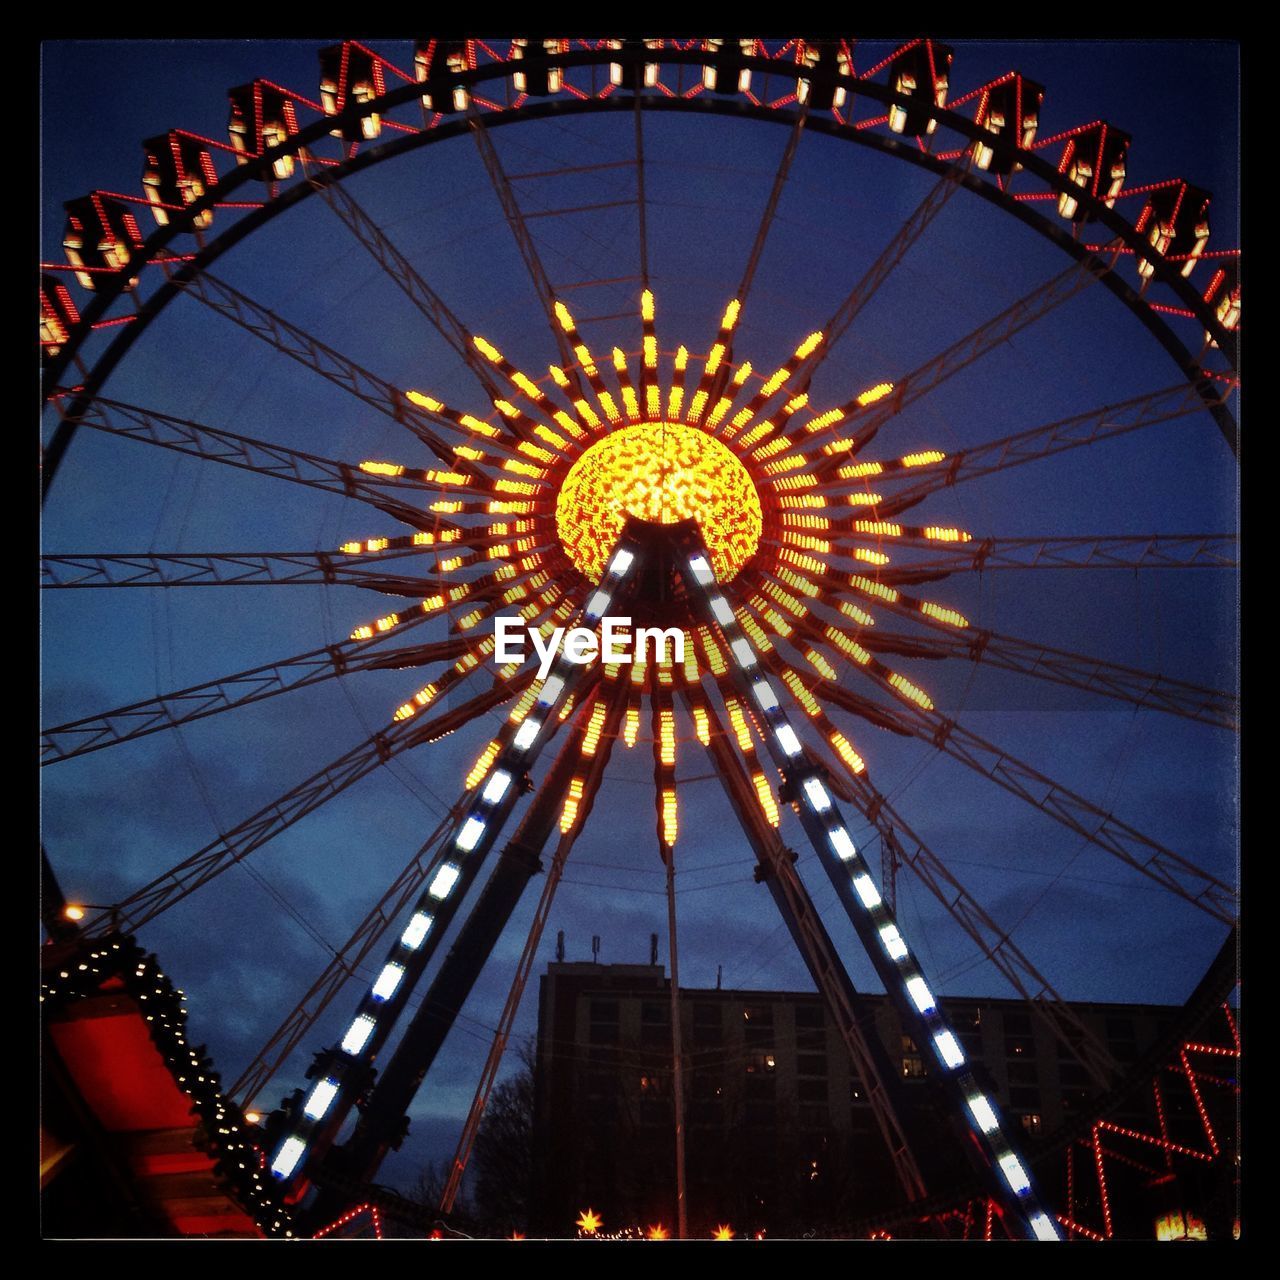 LOW ANGLE VIEW OF FERRIS WHEEL AT NIGHT